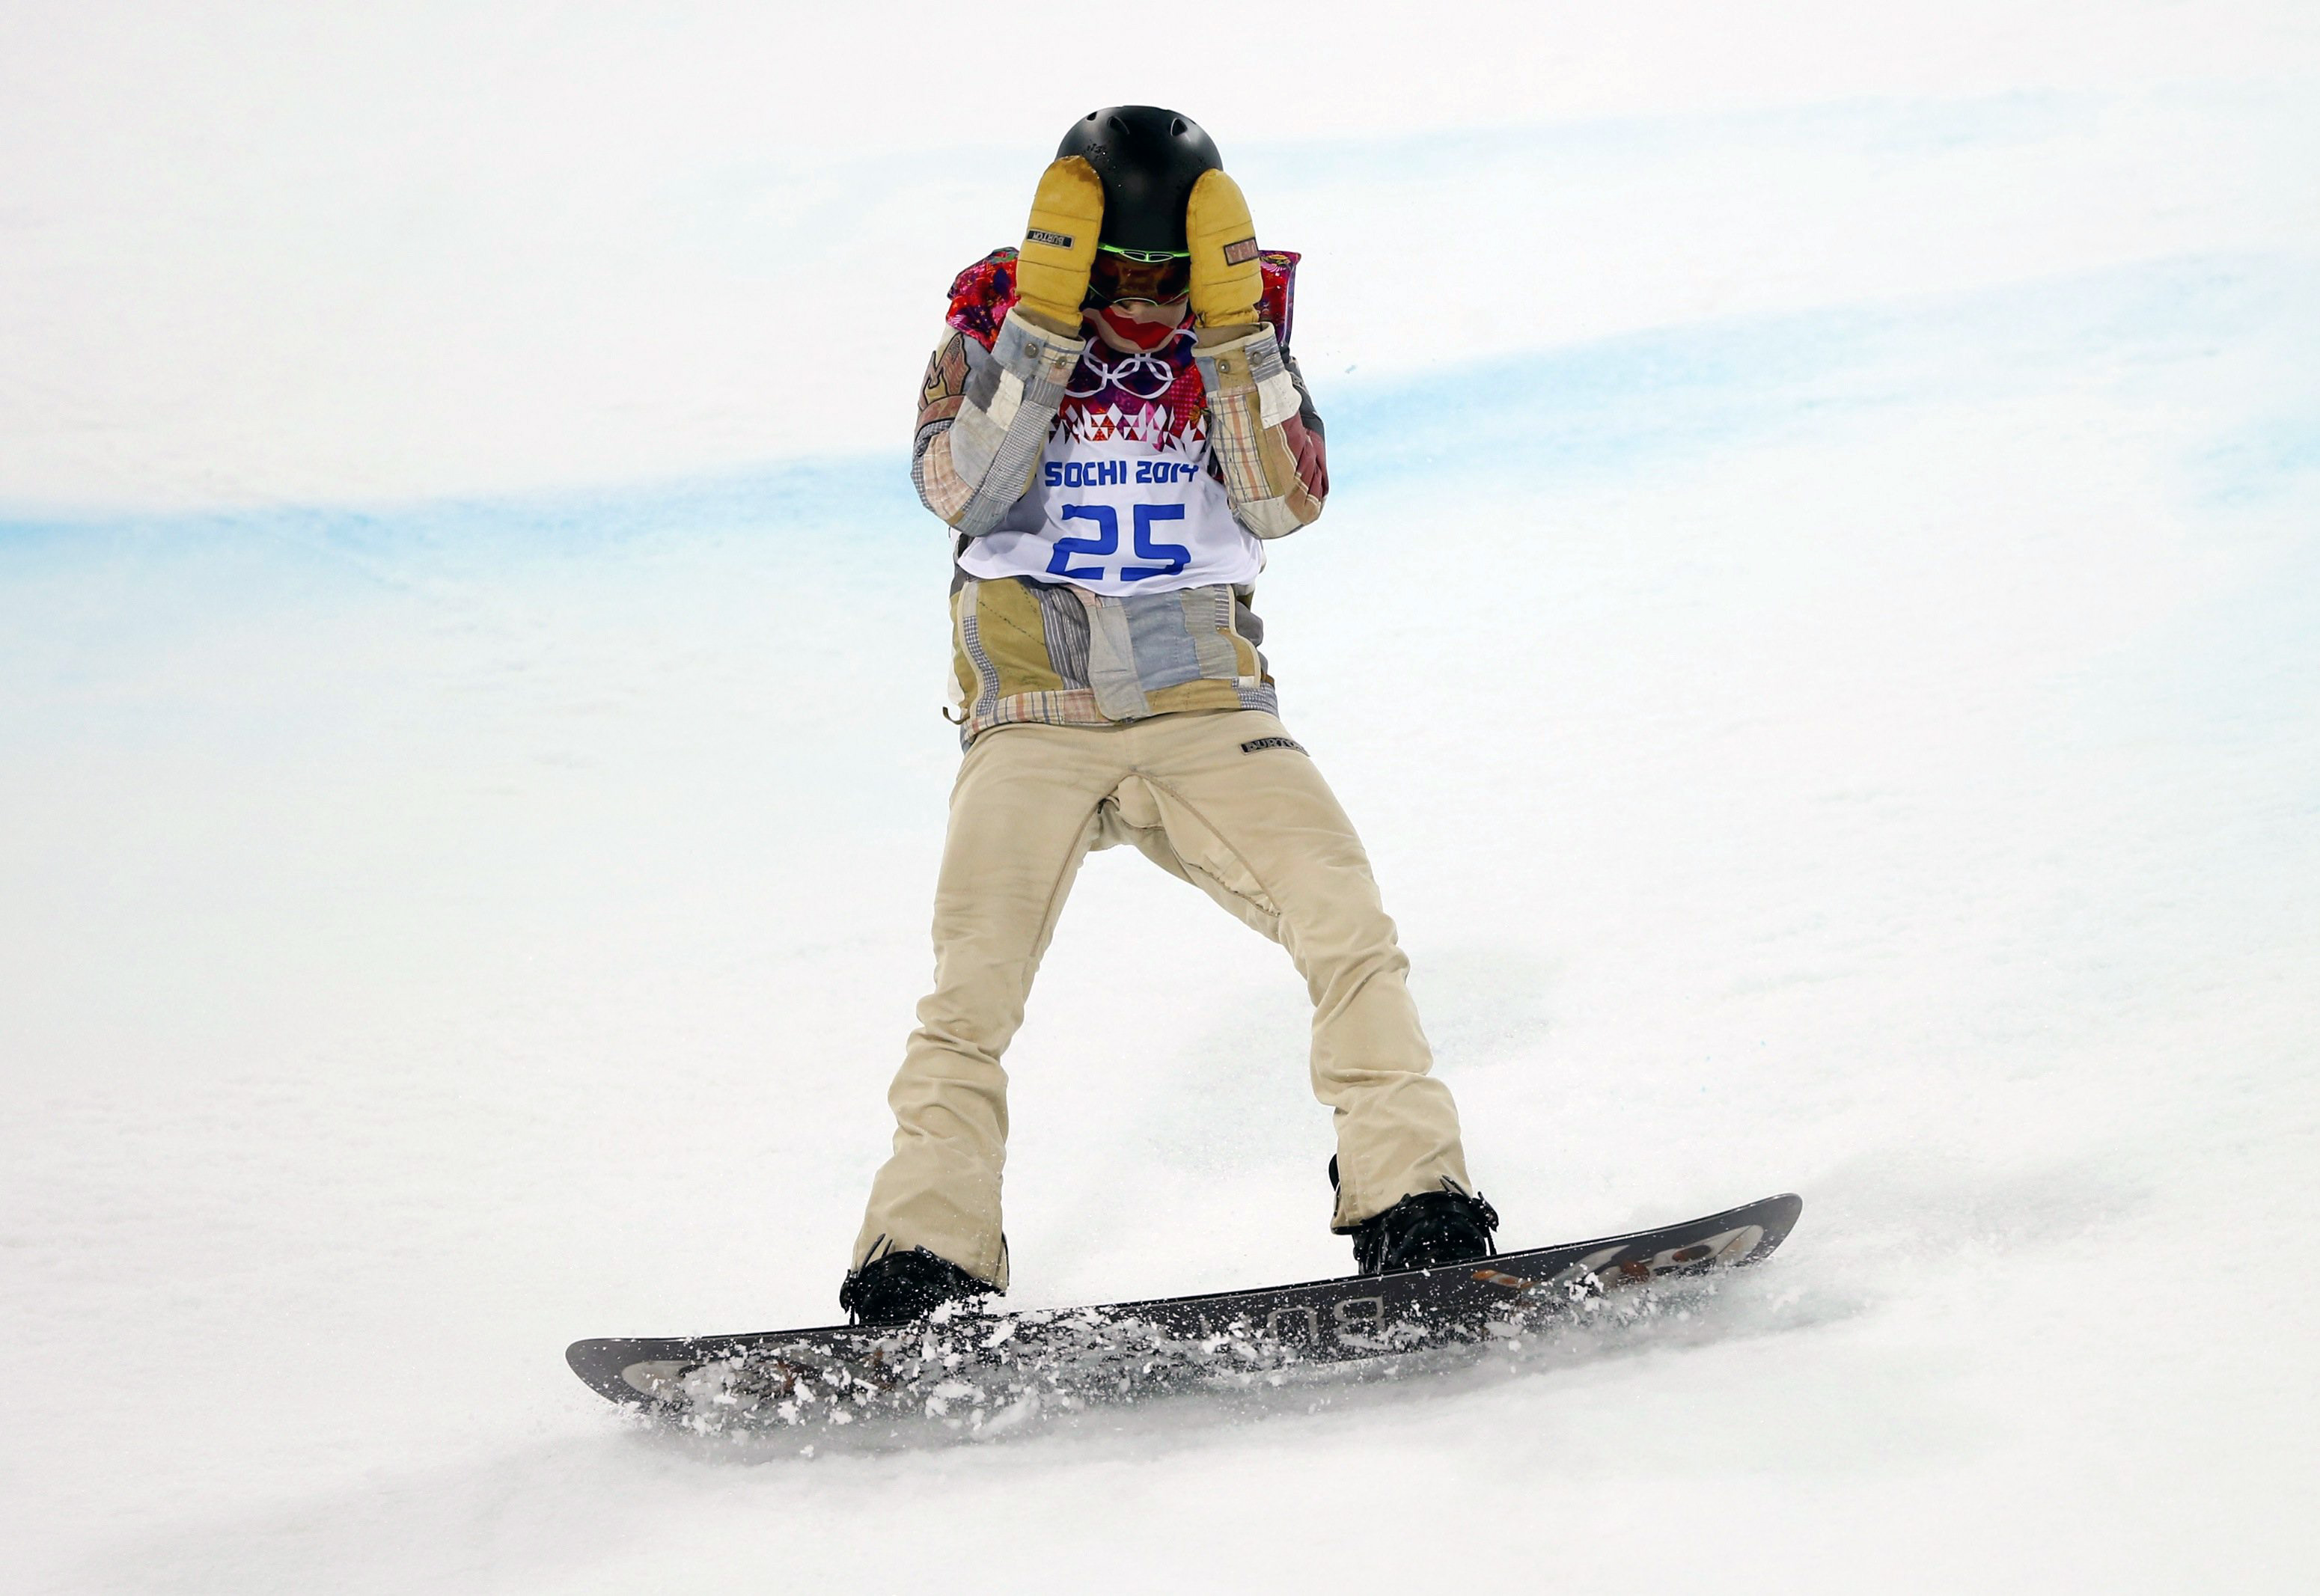 Shaun White of the U.S. reacts after crashing during the men's snowboard halfpipe final event.